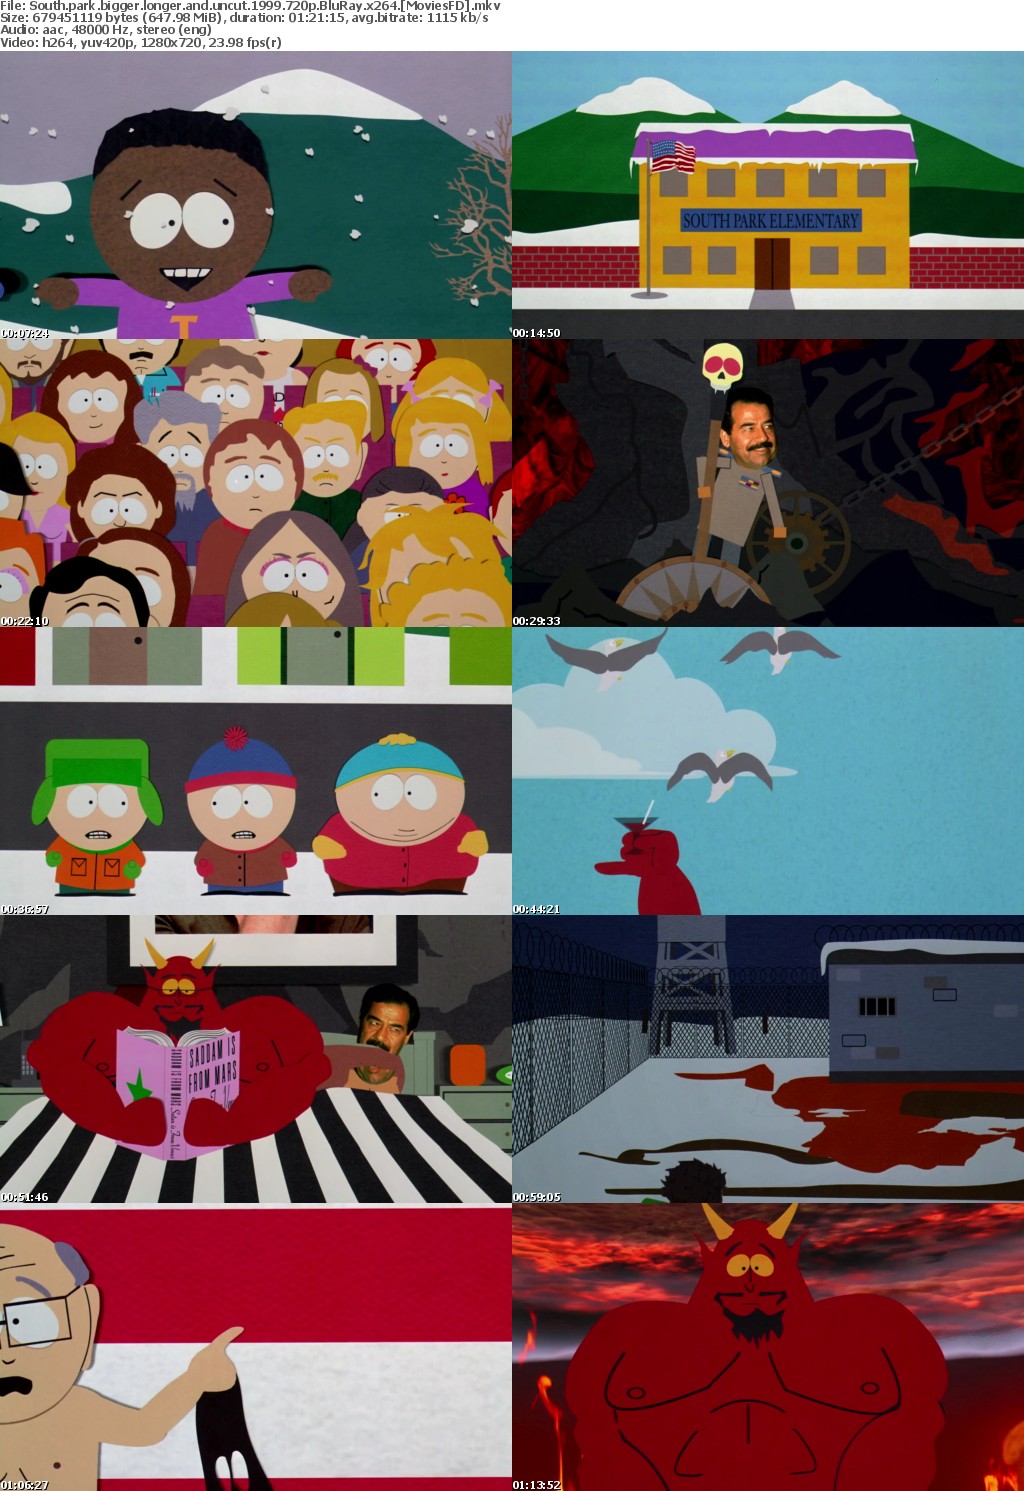 South Park Bigger Longer and Uncut (1999) 720P Bluray X264 Moviesfd